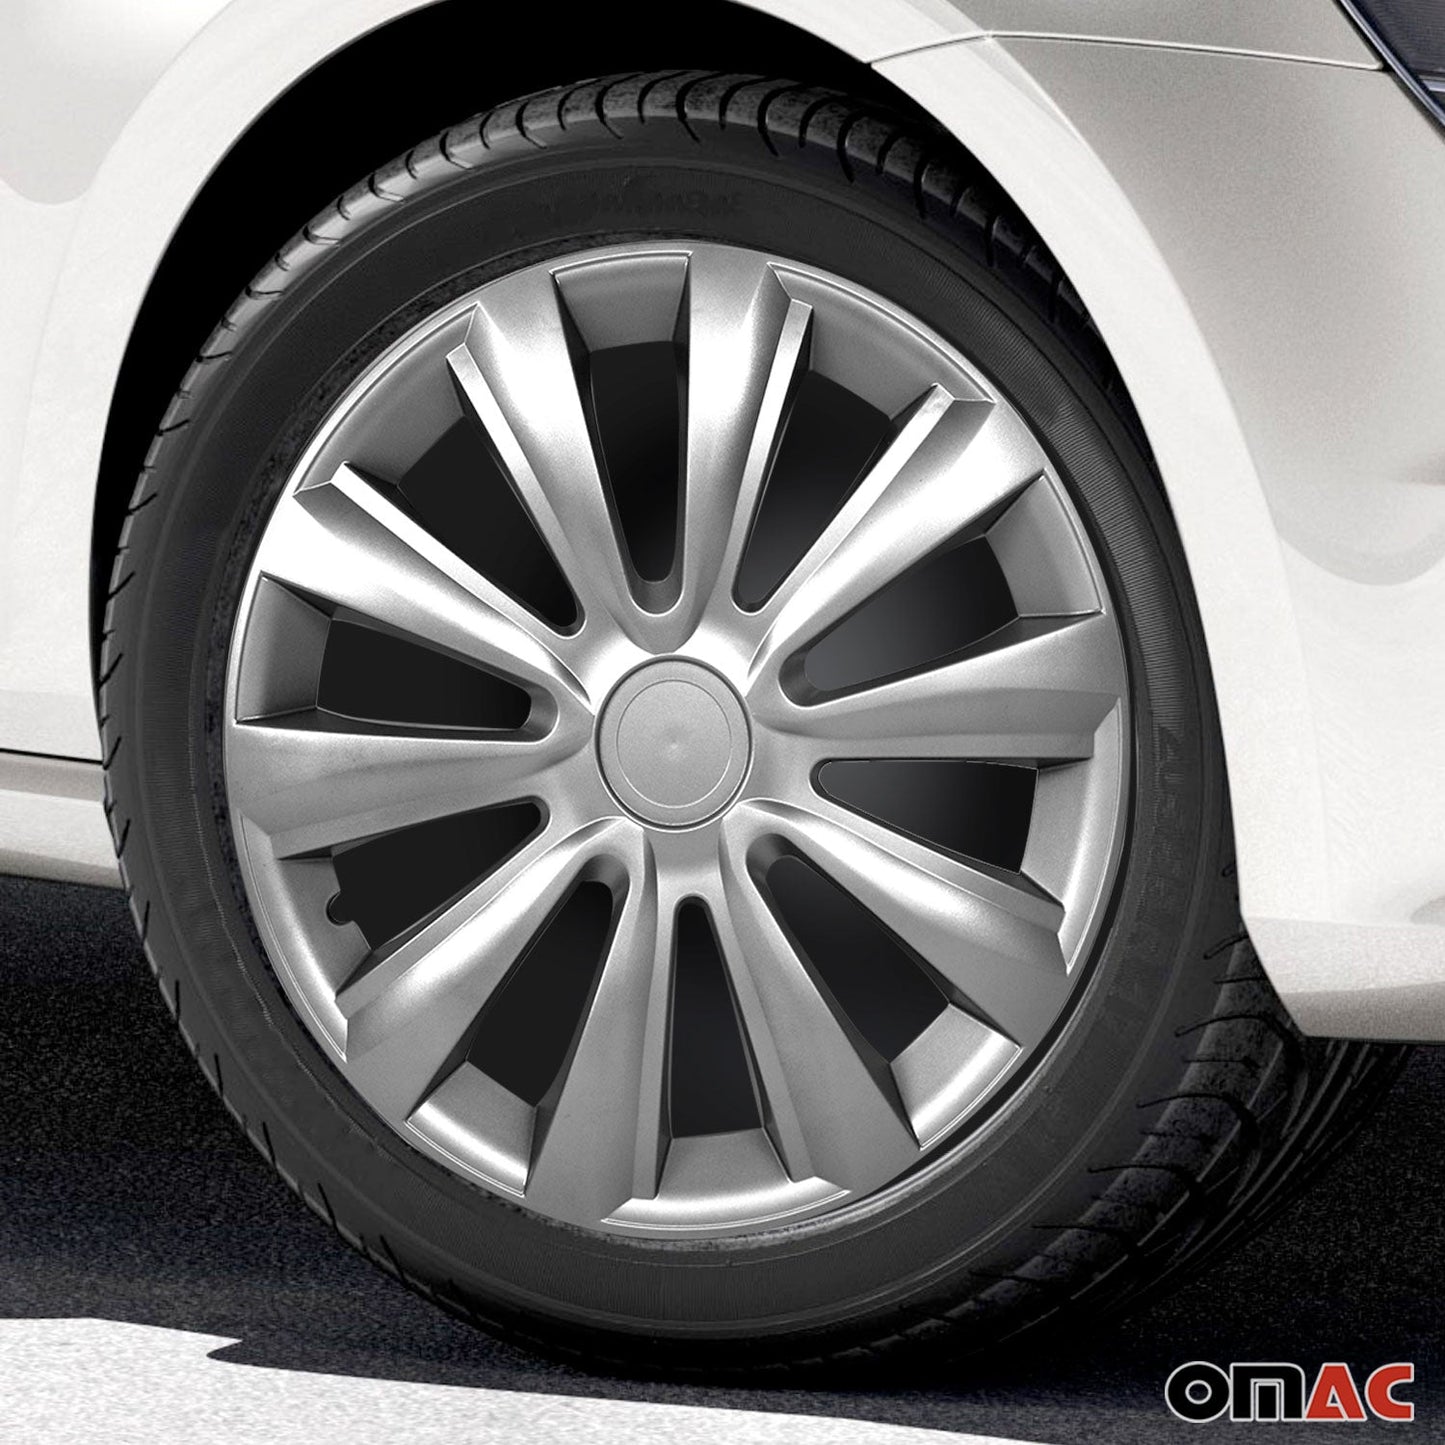 OMAC 16 Inch Wheel Covers Hubcaps for Scion Silver Gray Gloss G002355